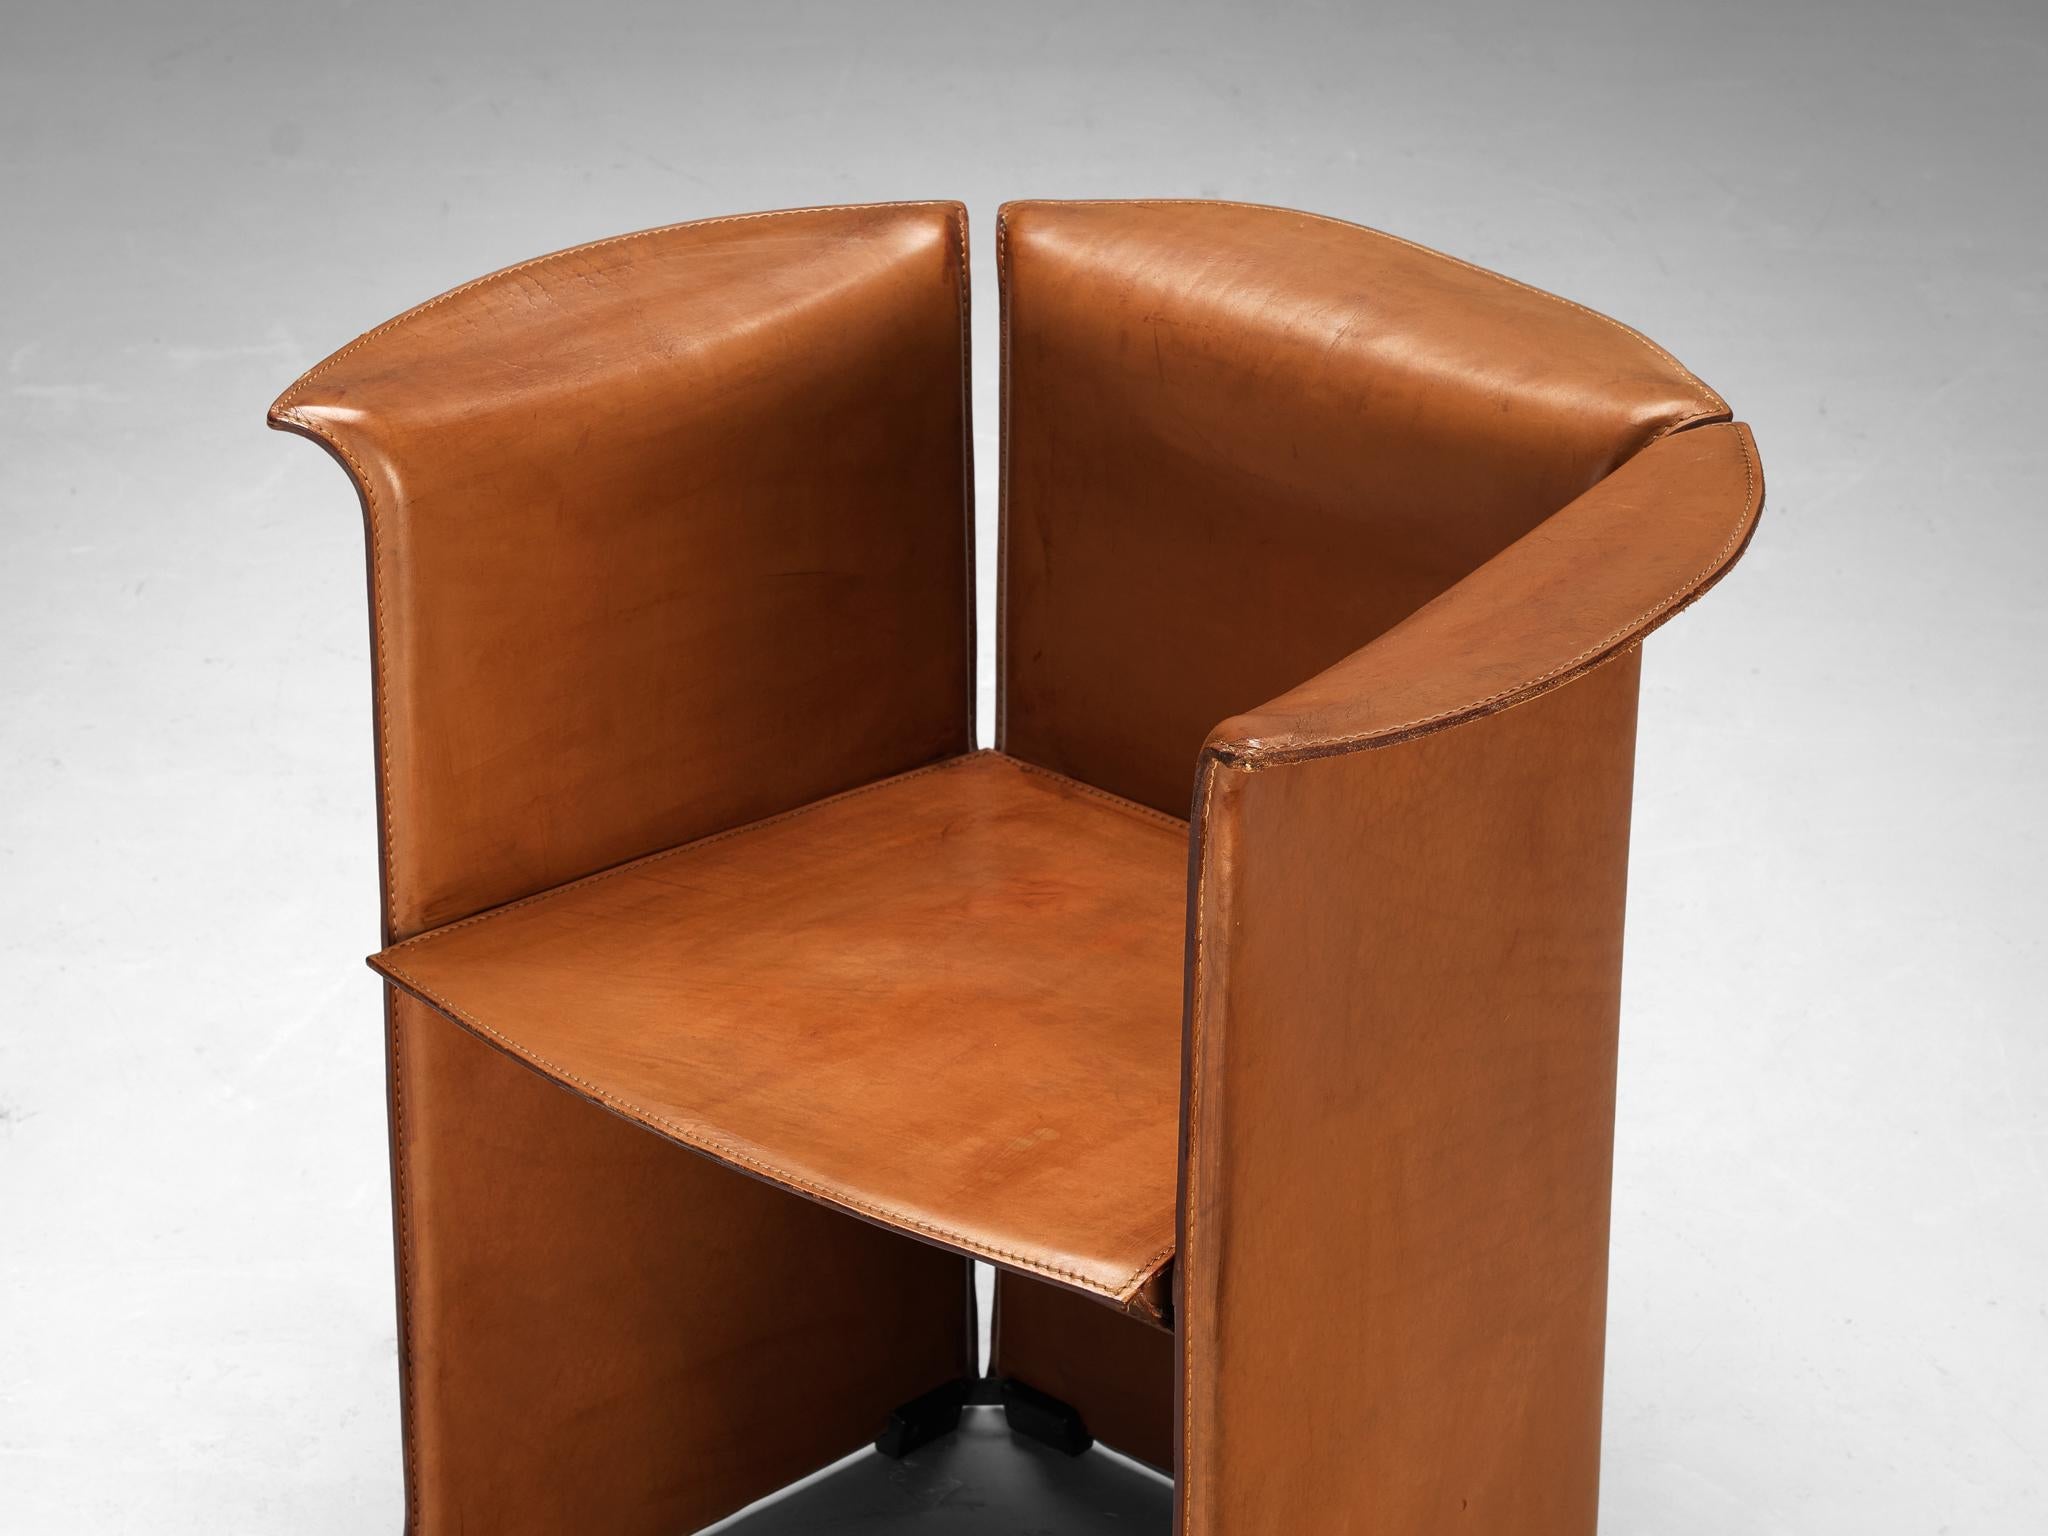 Isao Hosoe for Cassina 'Artù' Armchairs in Cognac Brown Leather